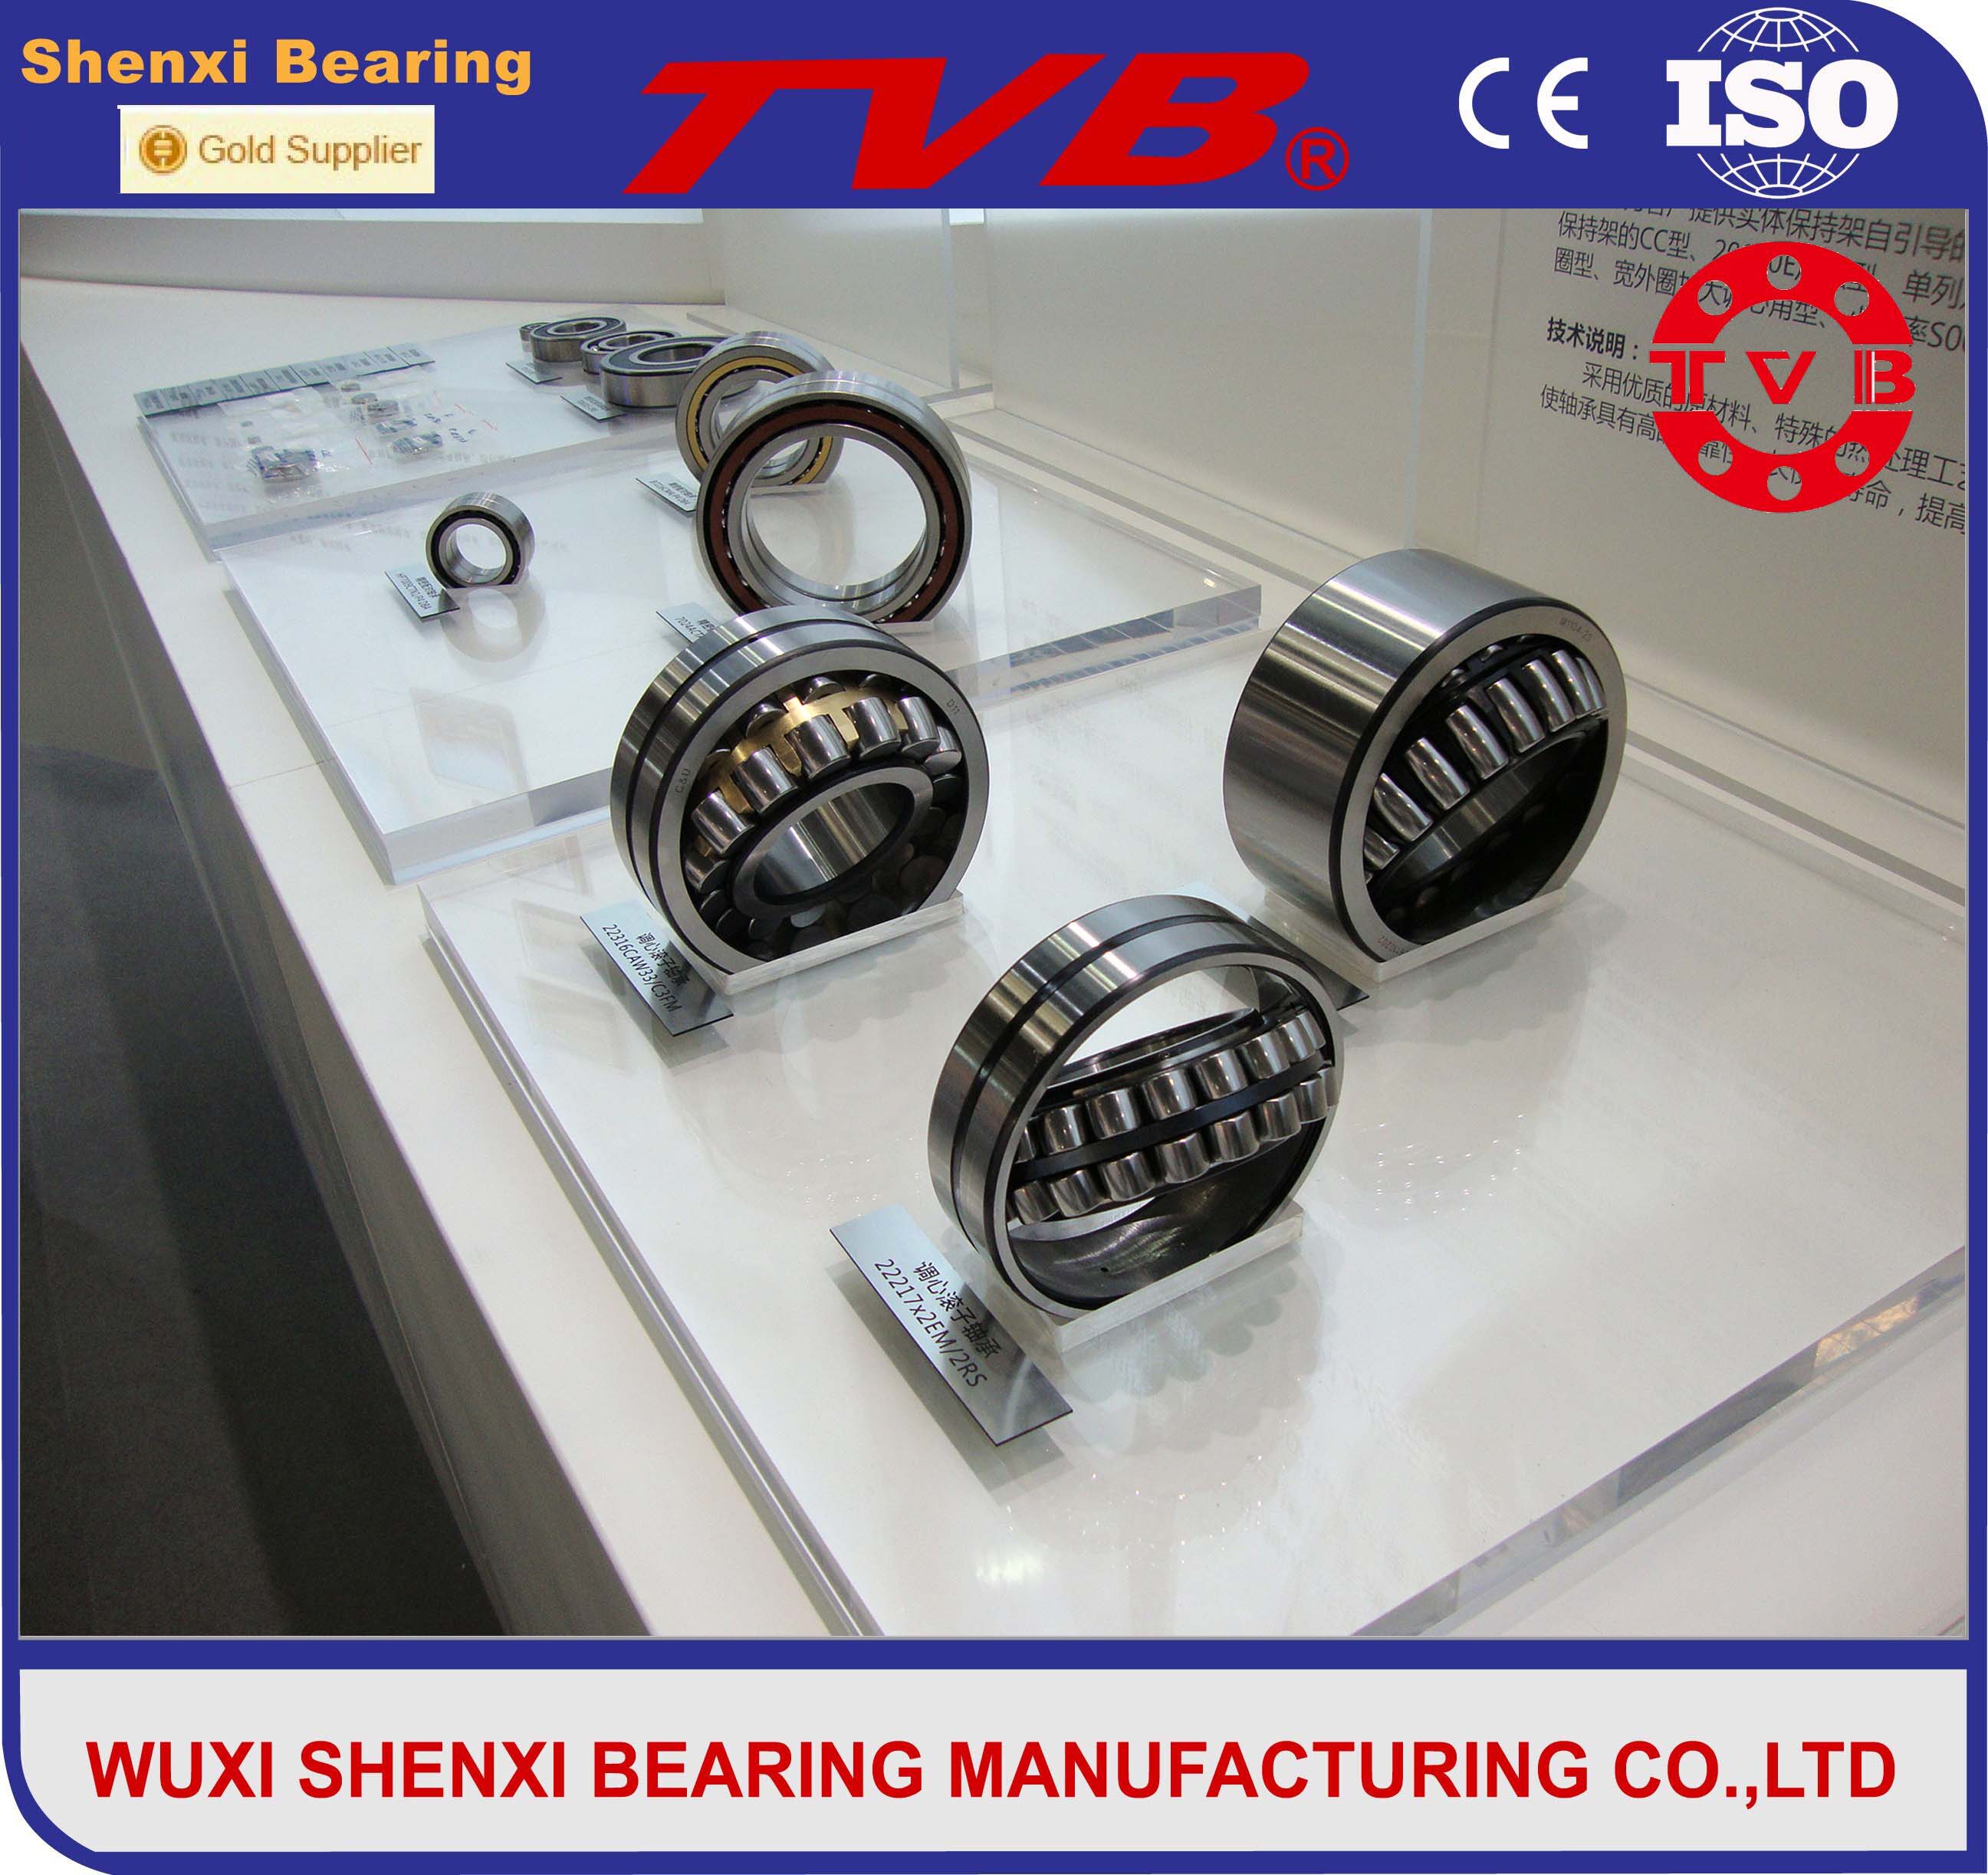 Industrial 24156CC/W33 Self-aligning P6 Precision CC Roller Bearings for Paper Making Machine